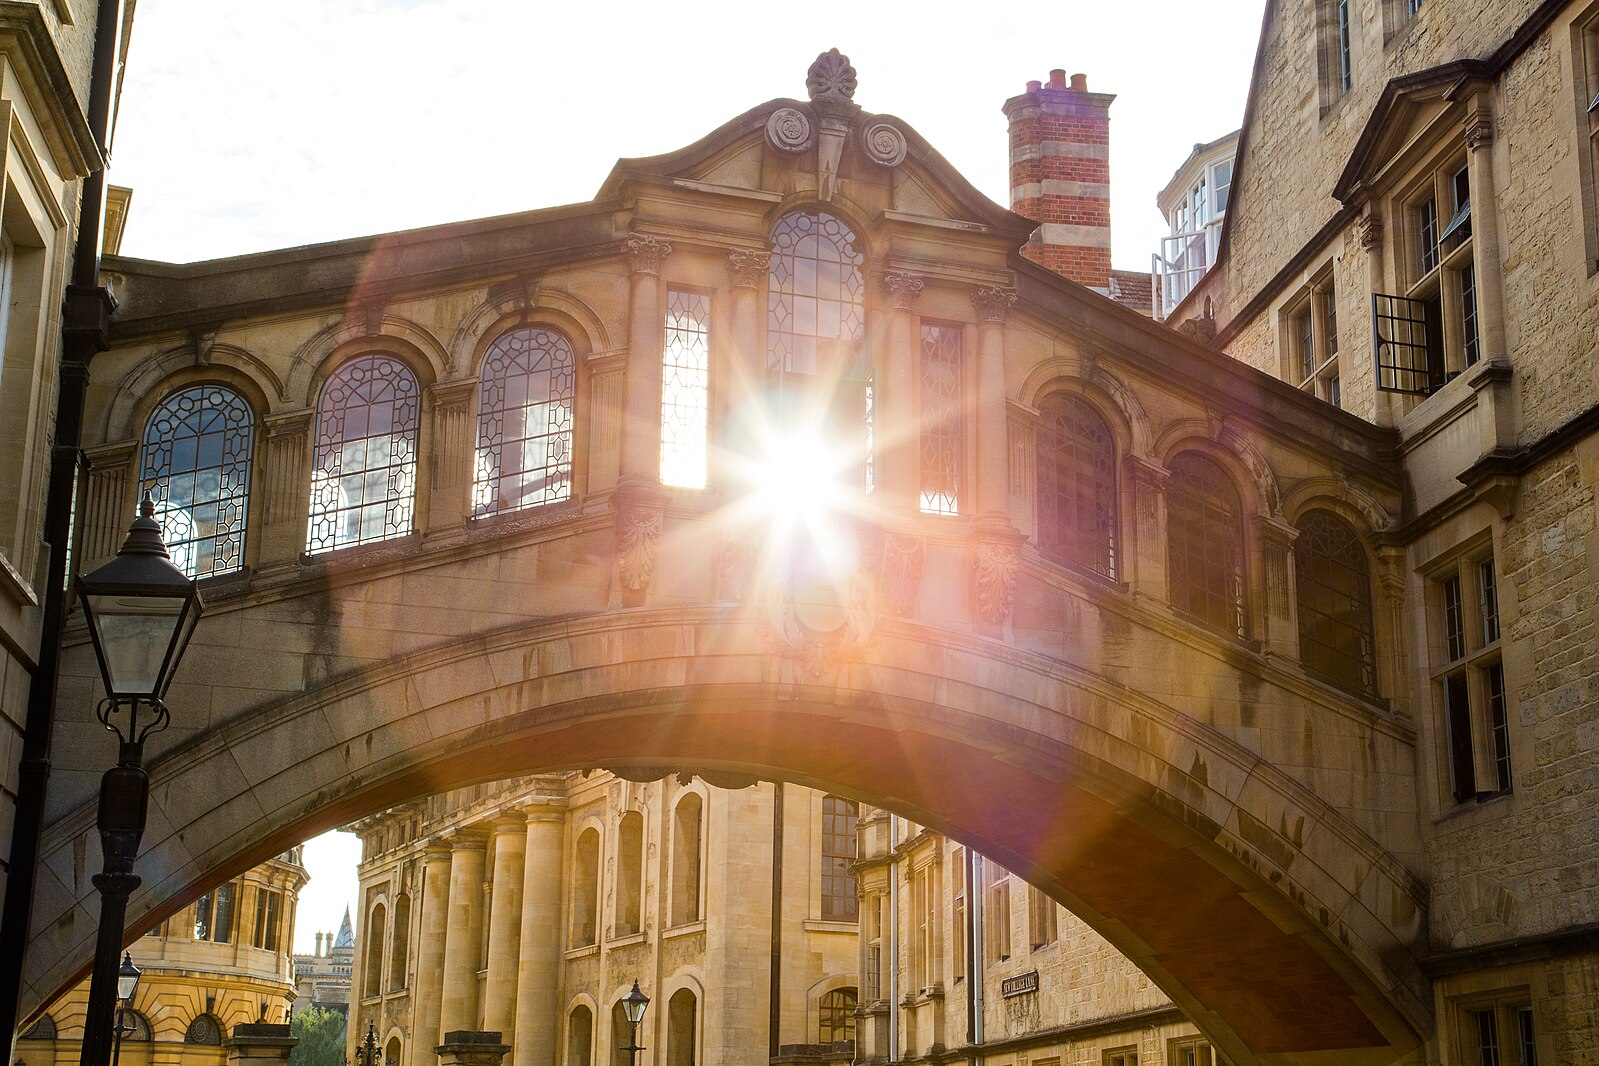 Bridge of Sighs: A Passage Through Time and Tradition